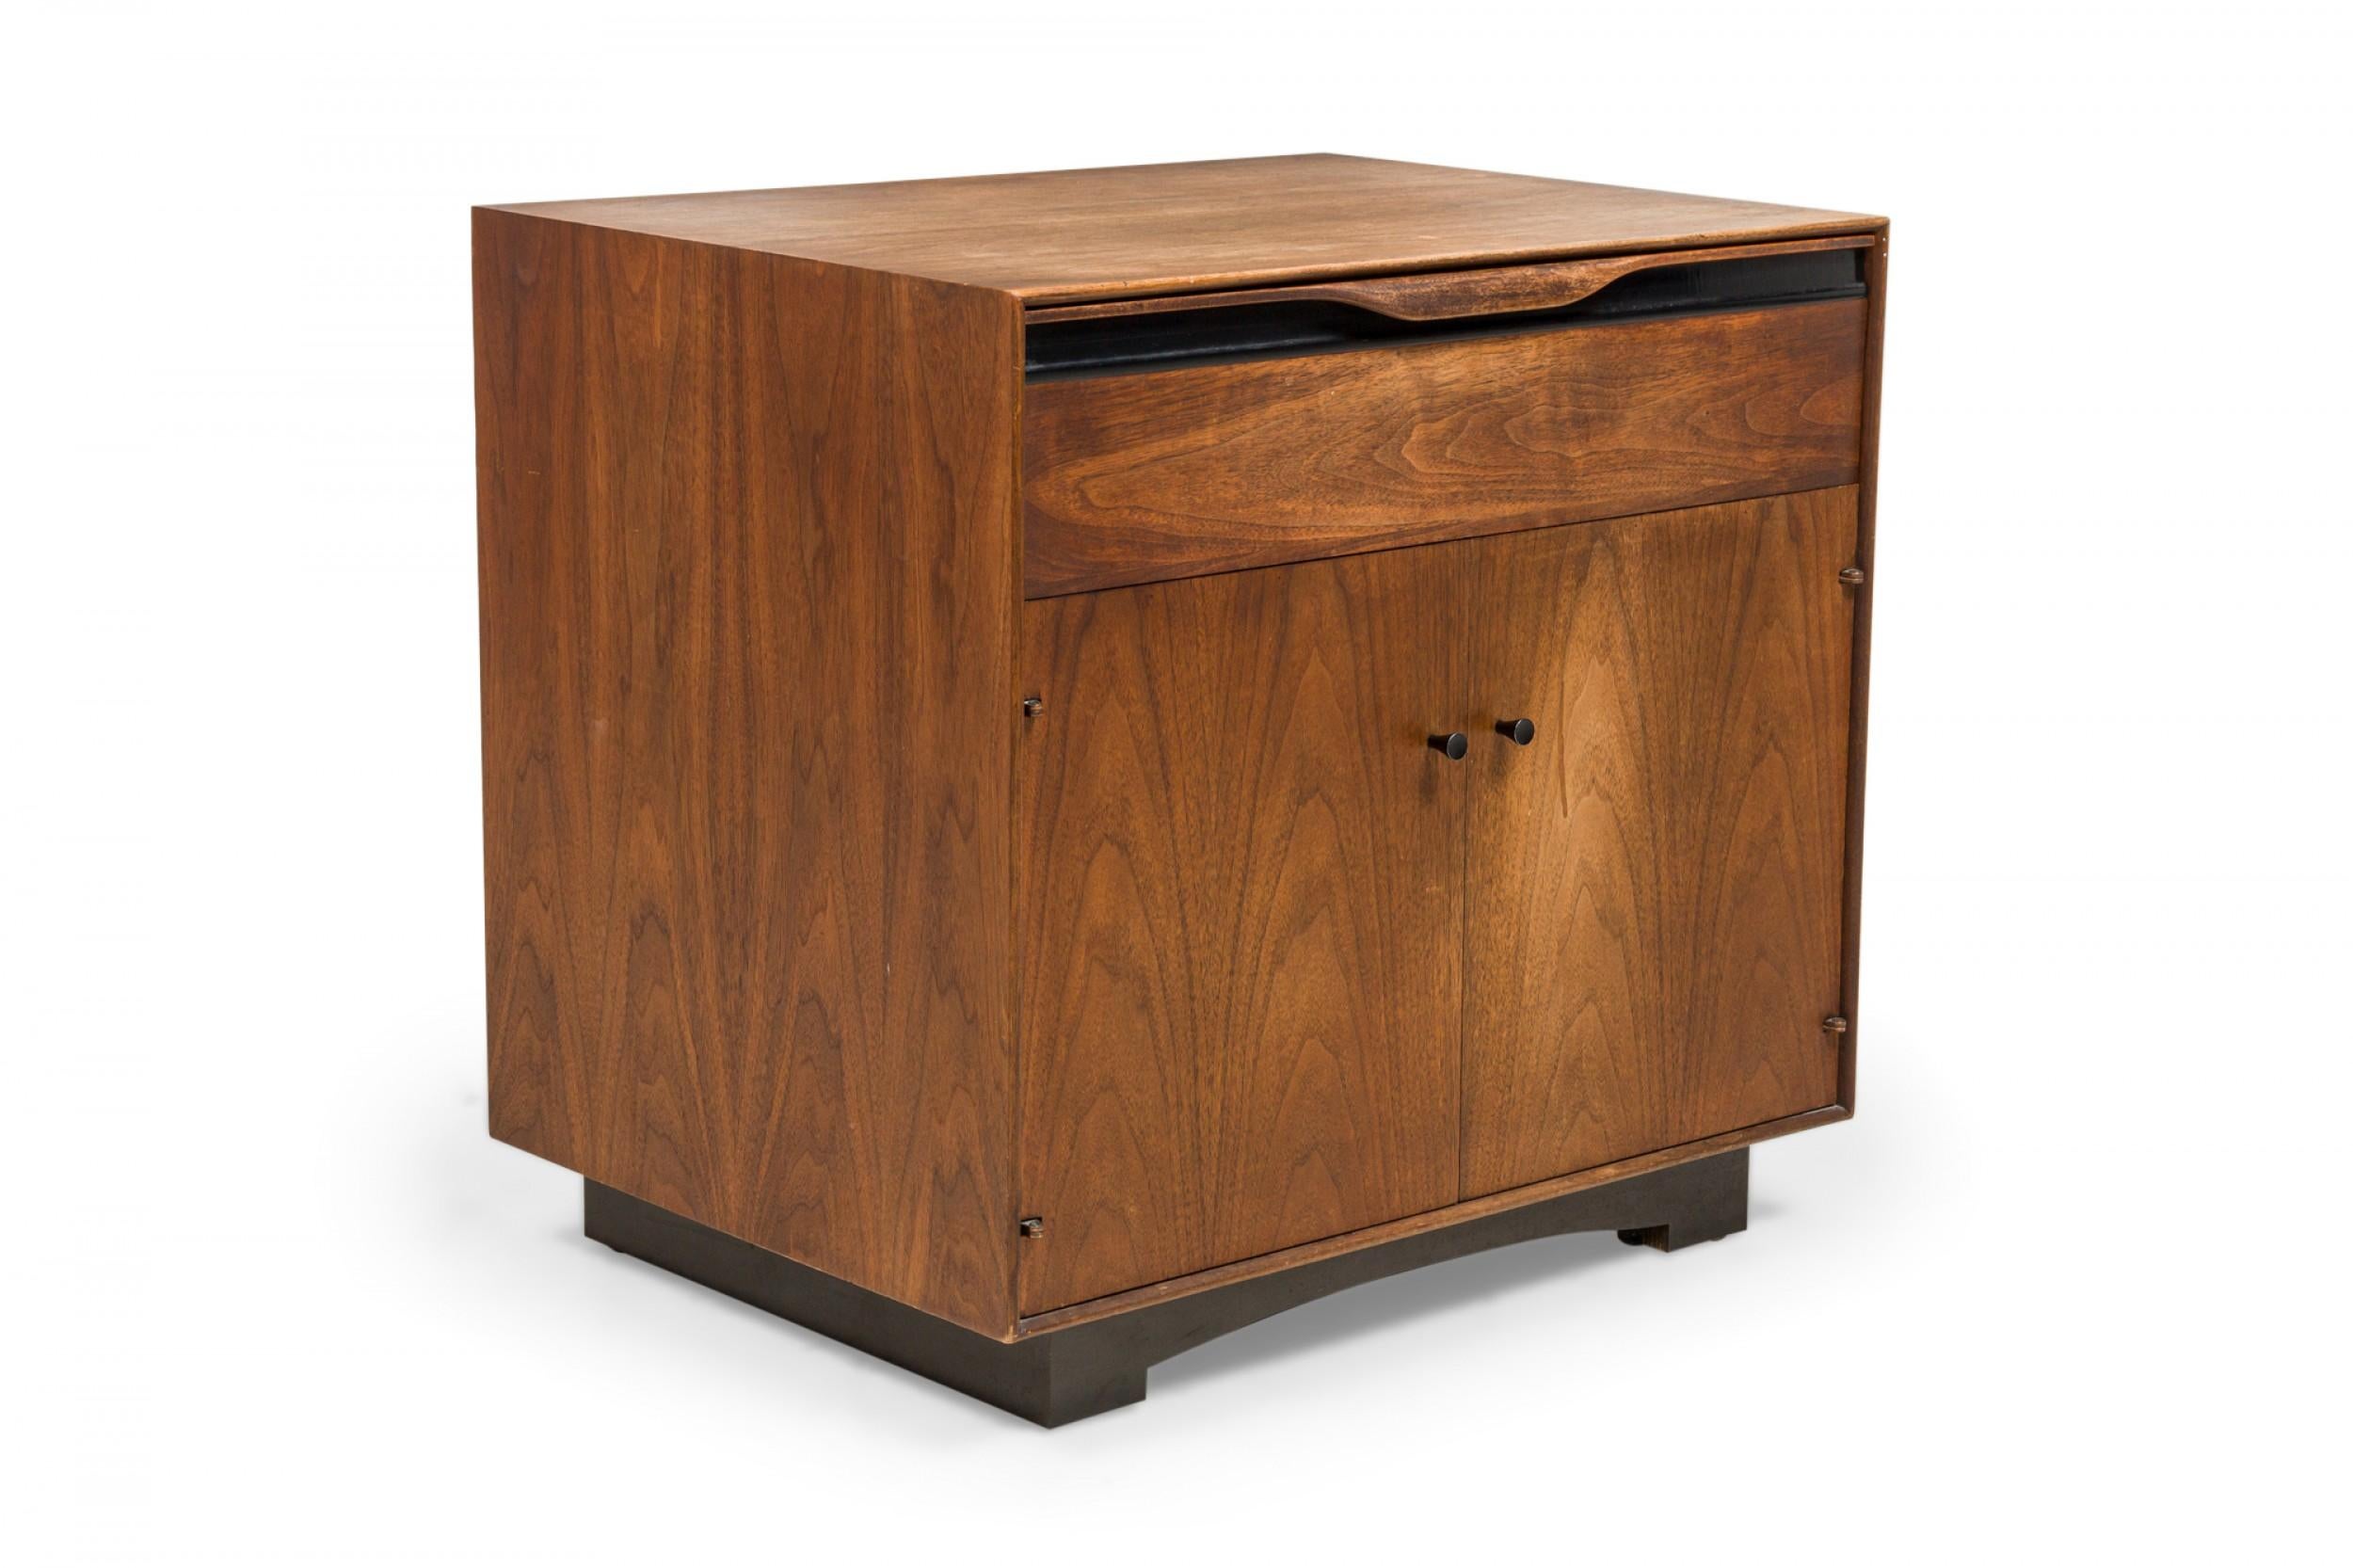 Pair American mid-century walnut bedside tables / commodes with walnut cabinets and a single drawer above a two door cabinet. (JOHN KAPEL FOR GLENN OF CALIFORNIA)(PRICED AS PAIR)